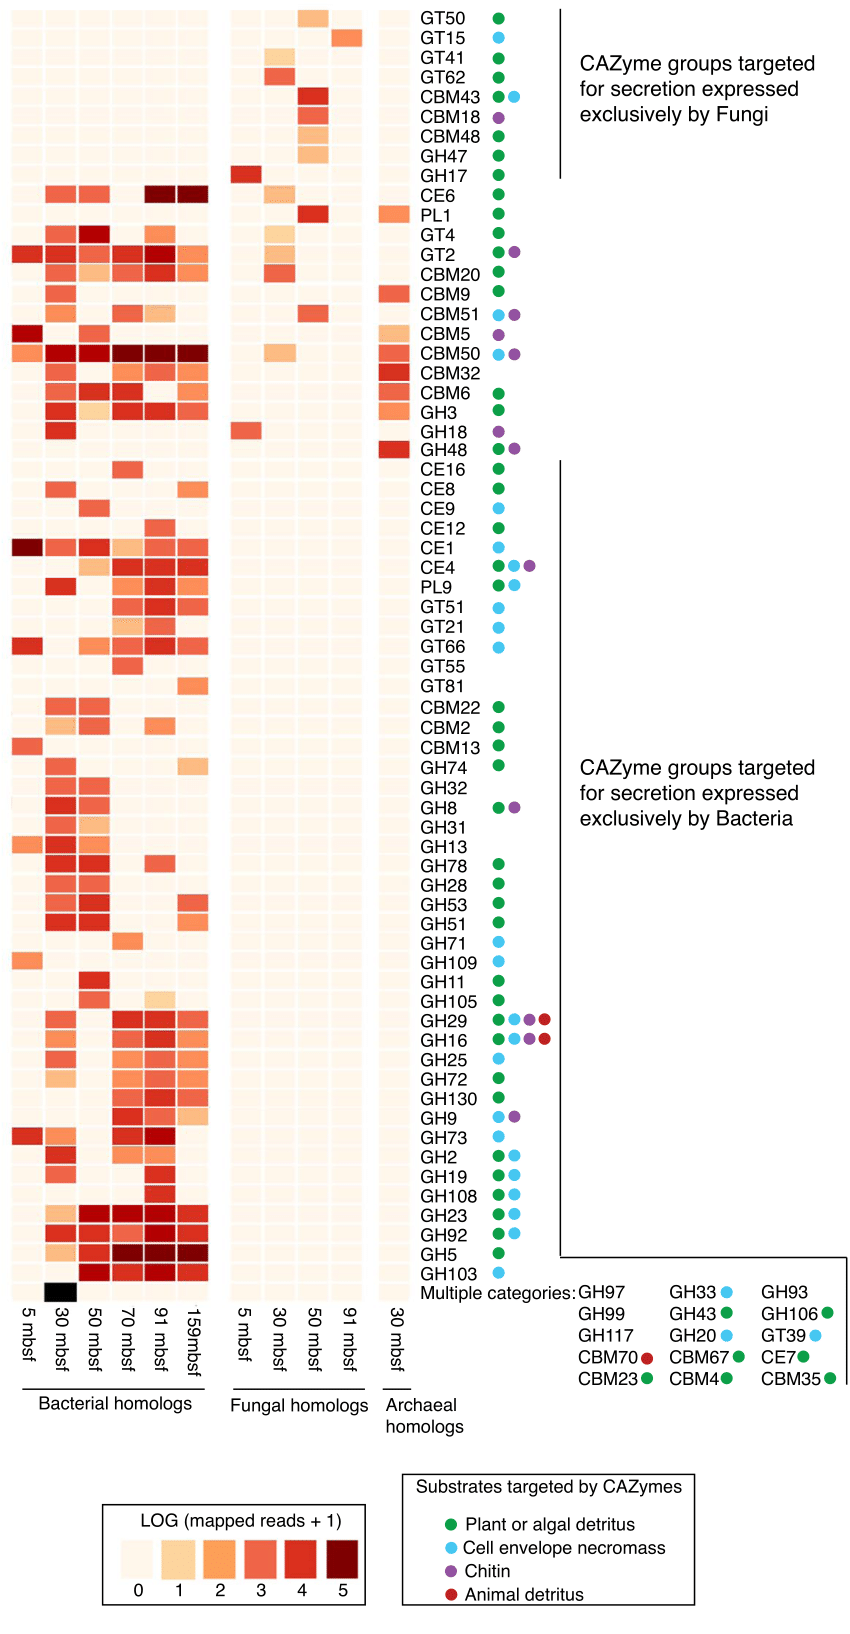 Distribution Of Cazy Protein Classes With Sequence Similarity To